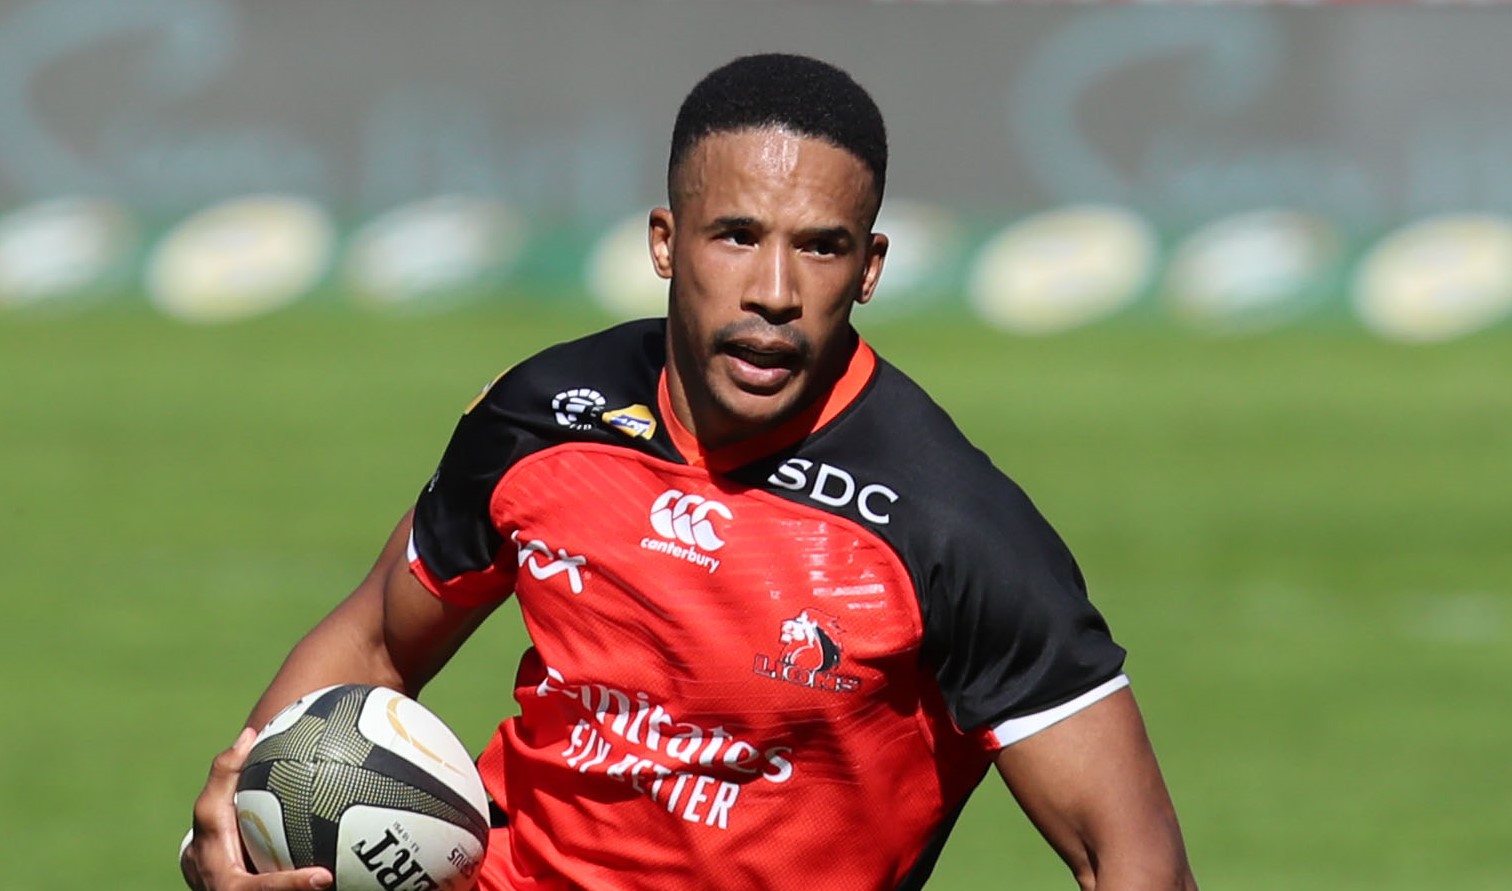 Courtnall Douglas Skosan of the Lions during the 2021 Rainbow Cup SA match between Lions and Stormers at Ellis Park Stadium in Johannesburg on the 15 May 2021 ©Muzi Ntombela/BackpagePix